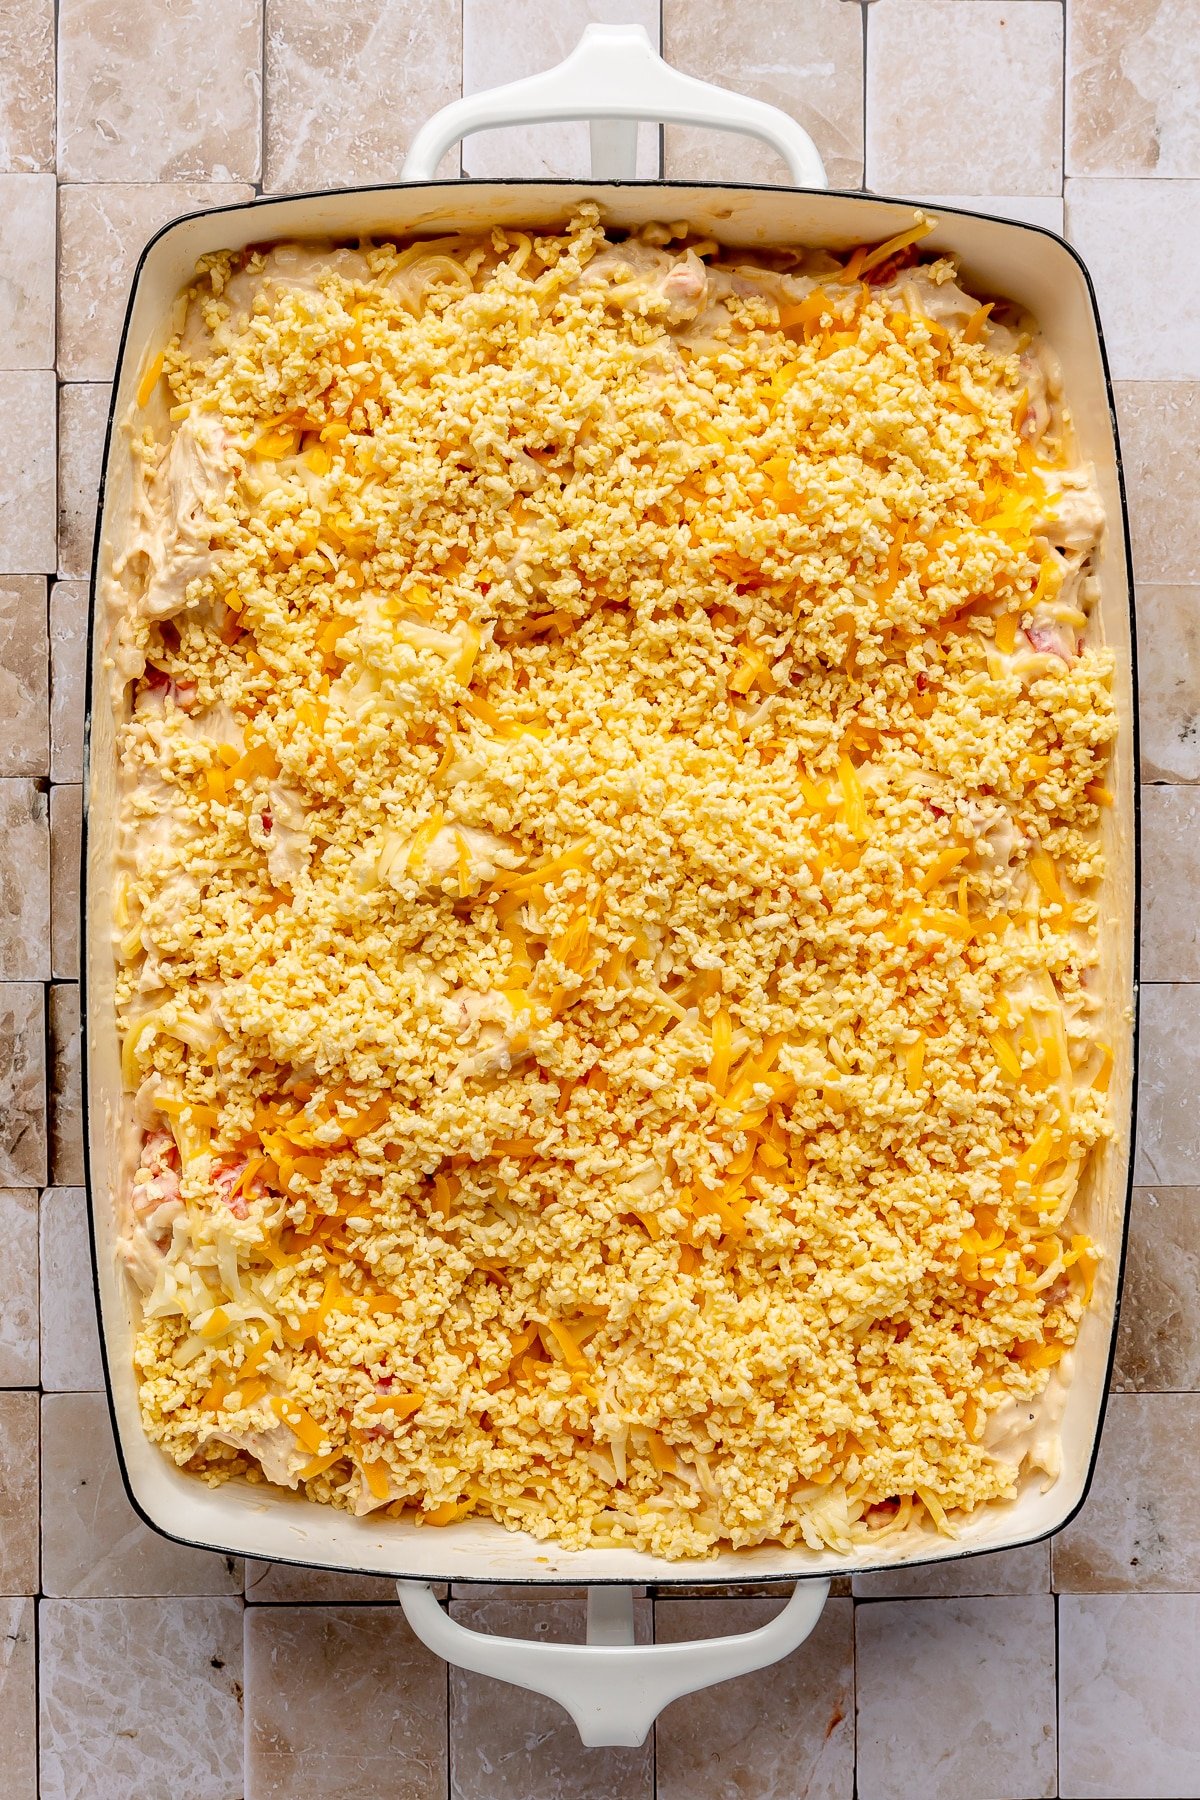 The creamy chicken mixture has been placed in a casserole dish and topped with breadcrumbs and shredded cheddar cheese.